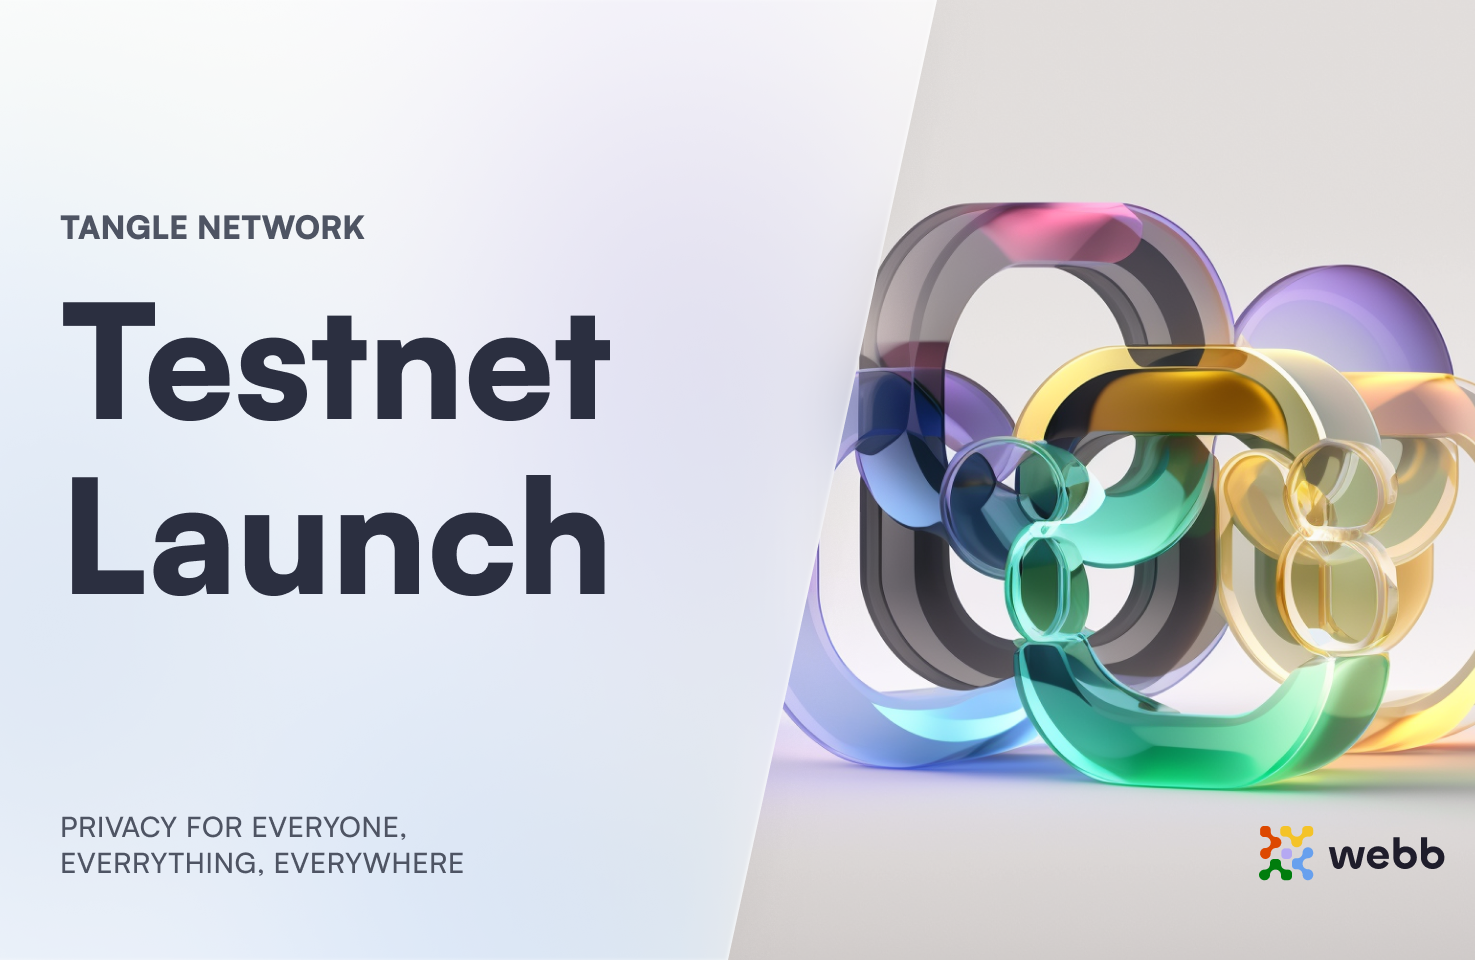 Announcing the Tangle Network Testnet Launch